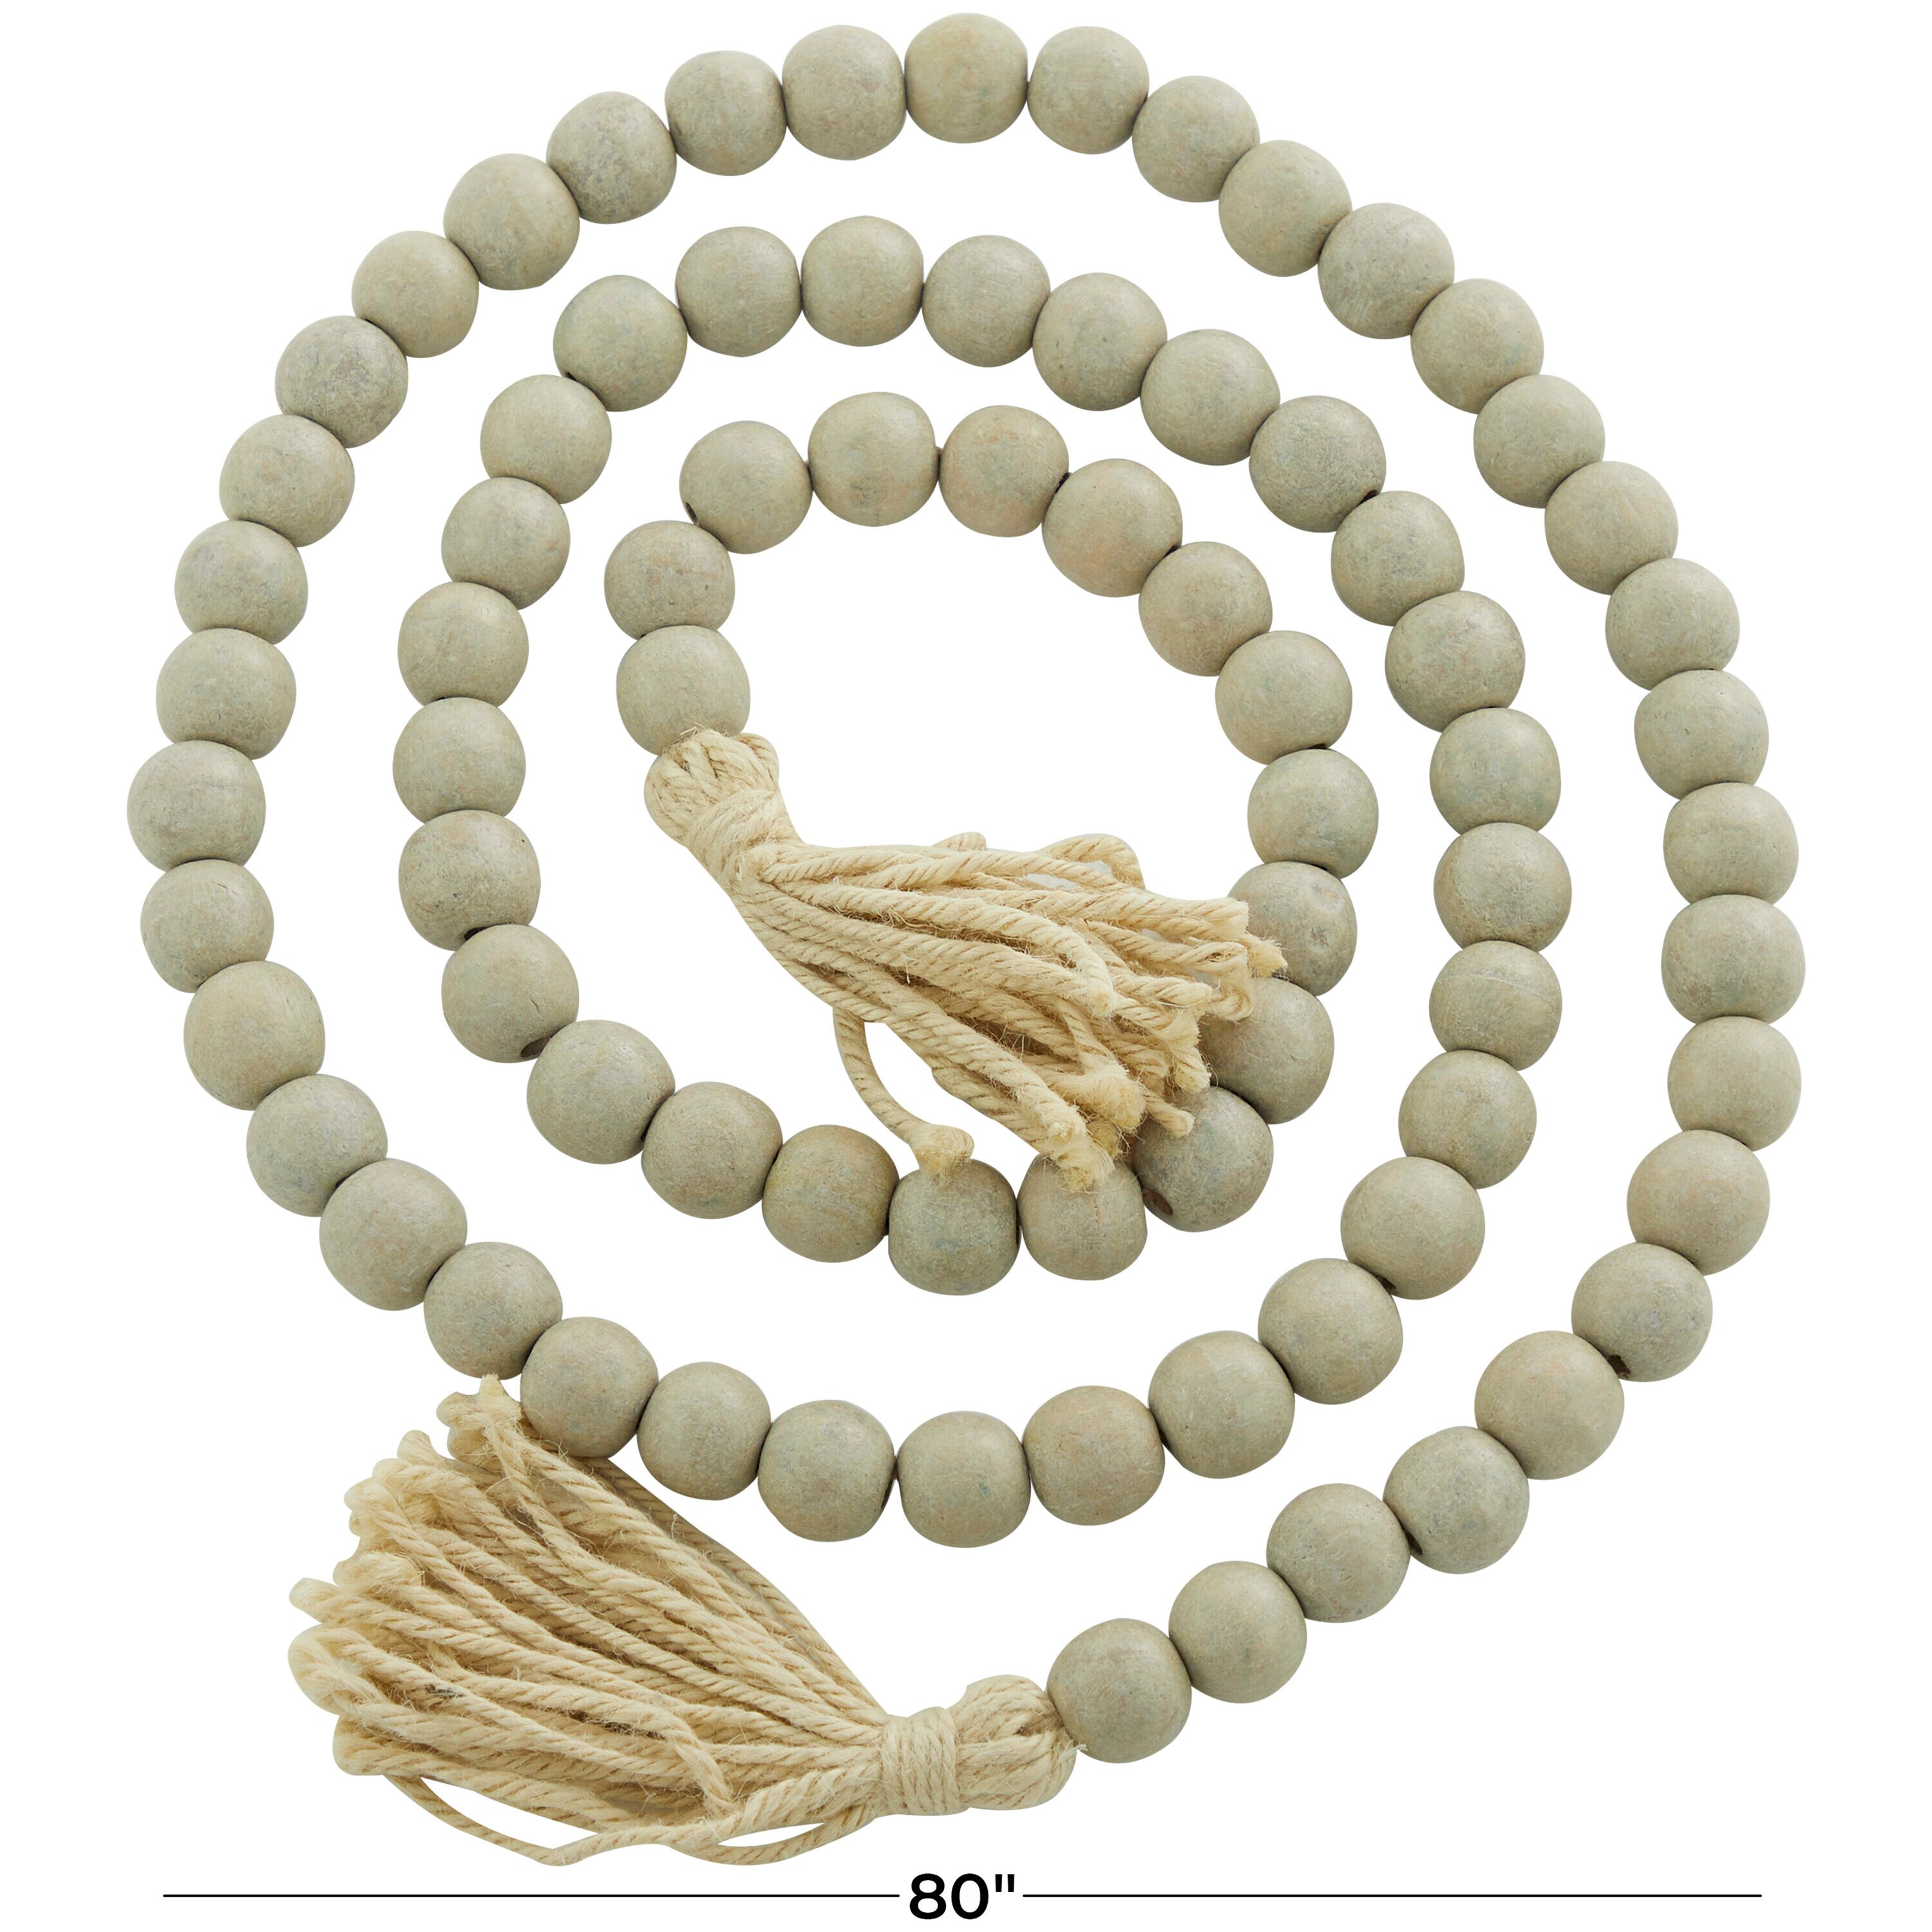 Wooden Bead Garland Farmhouse Rustic Country Tassle Prayer Beads Wall Hanging Decorations, Beige